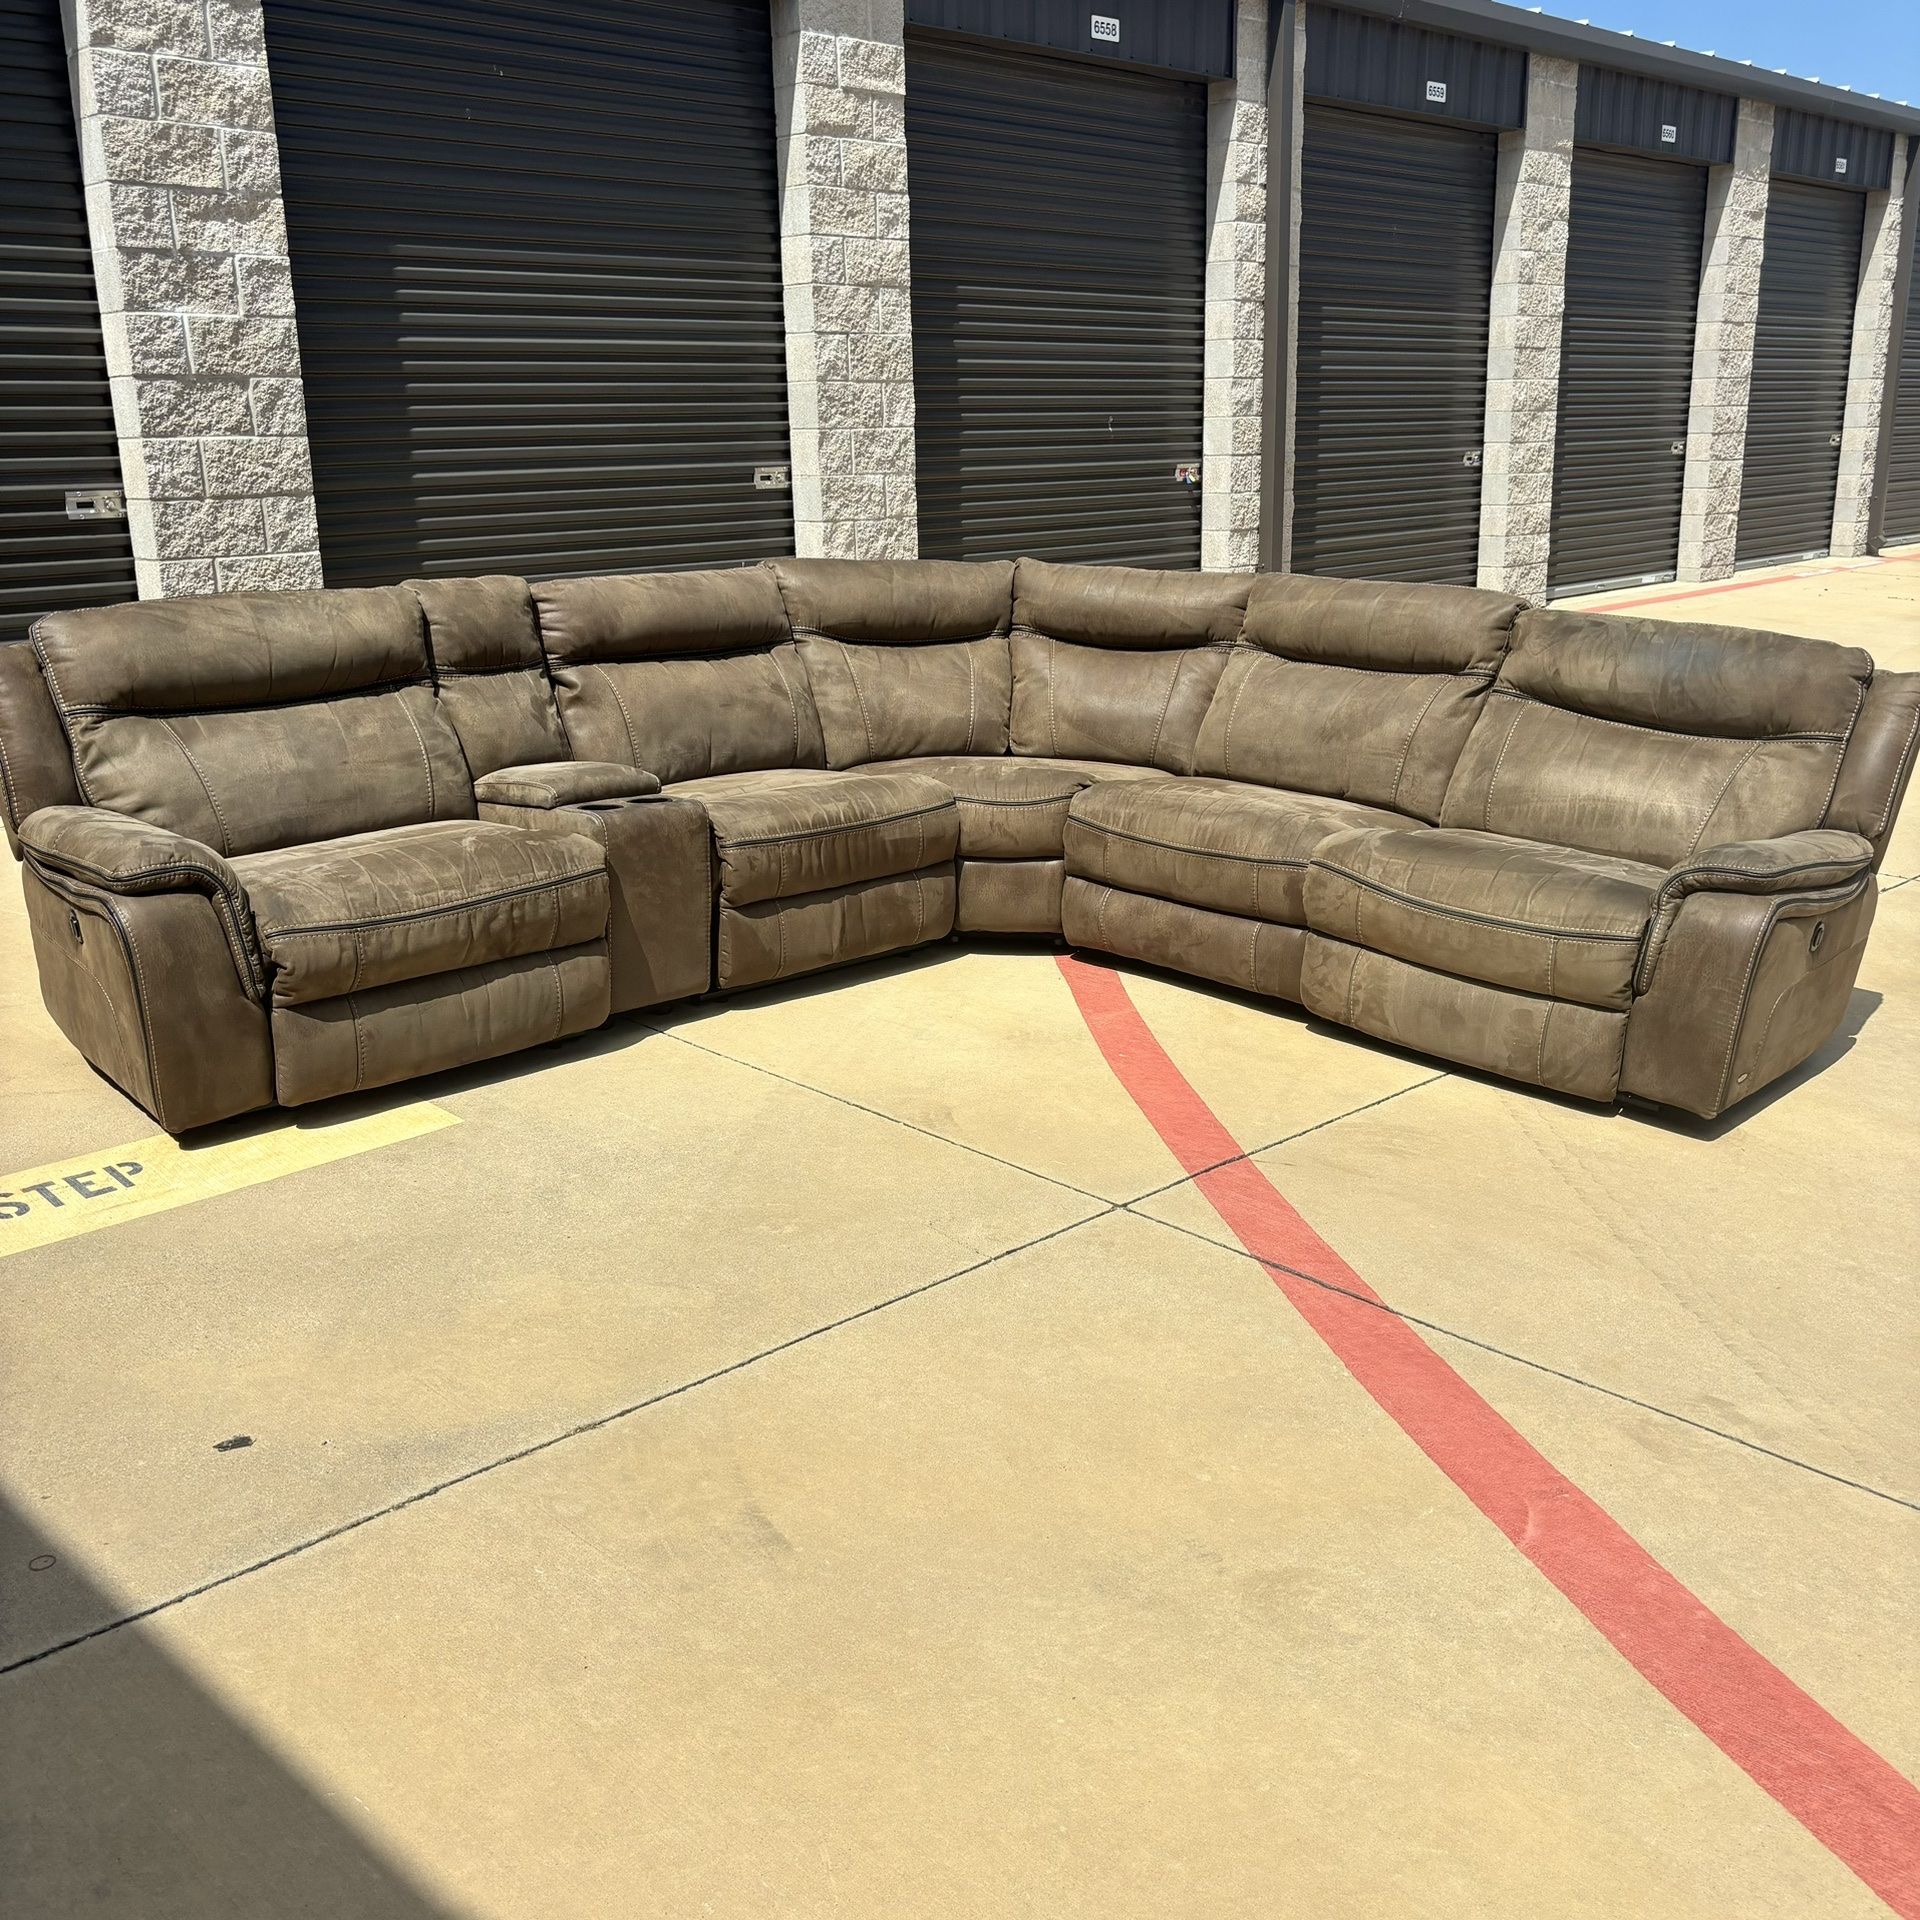 Beautiful Power Reclining Sectional. Delivery Available.